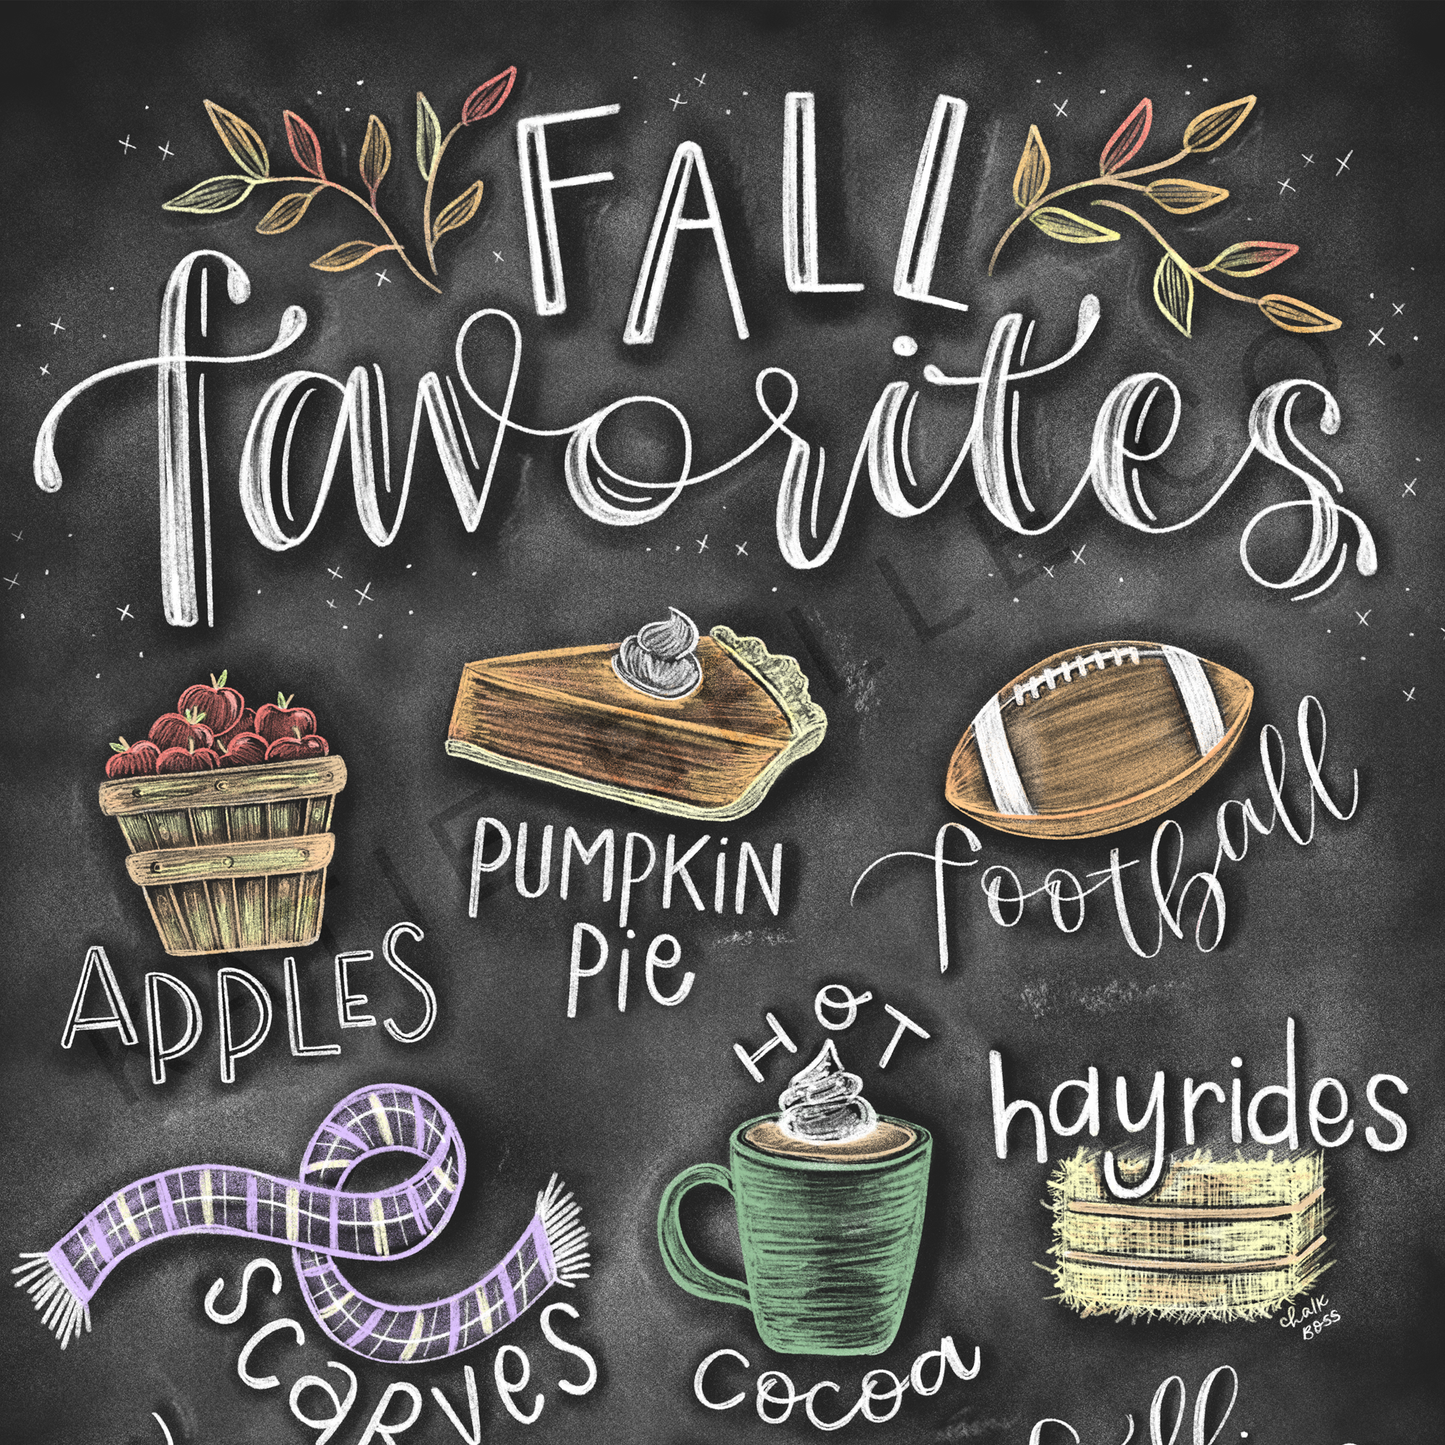 Fall favorites chalkboard print. Fall favorites hand lettered tittle. Fall doodles including apple, pumpkin pie, football, scarves, hot cocoa. hayrides, cozy socks, pumpkins, falling leaves. Fall decor. Chalk Art. Frame not included. Hand drawn by Katie Belle Co.  Fall colors. Autumn decor. Fall decor